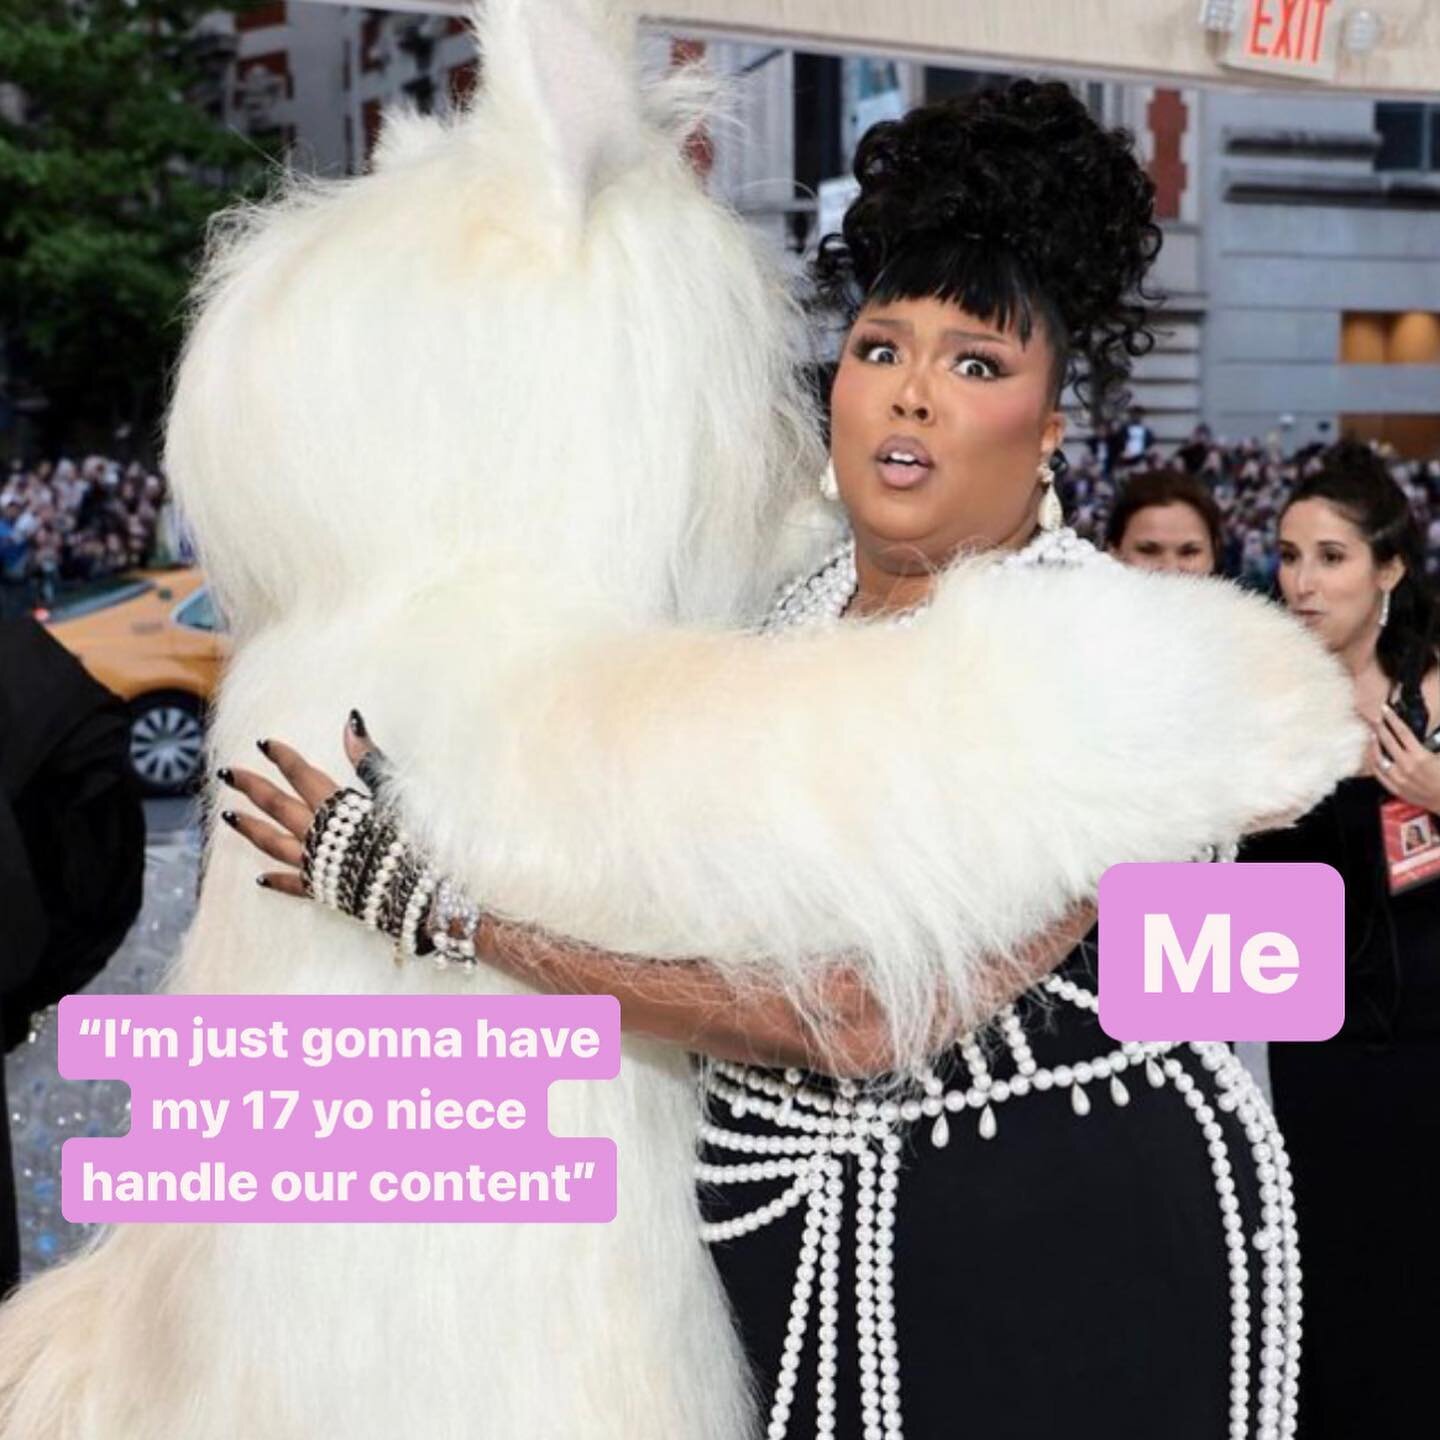 I mean&hellip;. Lizzo&rsquo;s face in this pic says more than my caption ever could.

PS- I&rsquo;m sure your niece is fantastic! ☠️

#socialmediamanagerlife #socialmediamarketing #socialmediastrategist #instagrammanagement #onlineserviceprovider